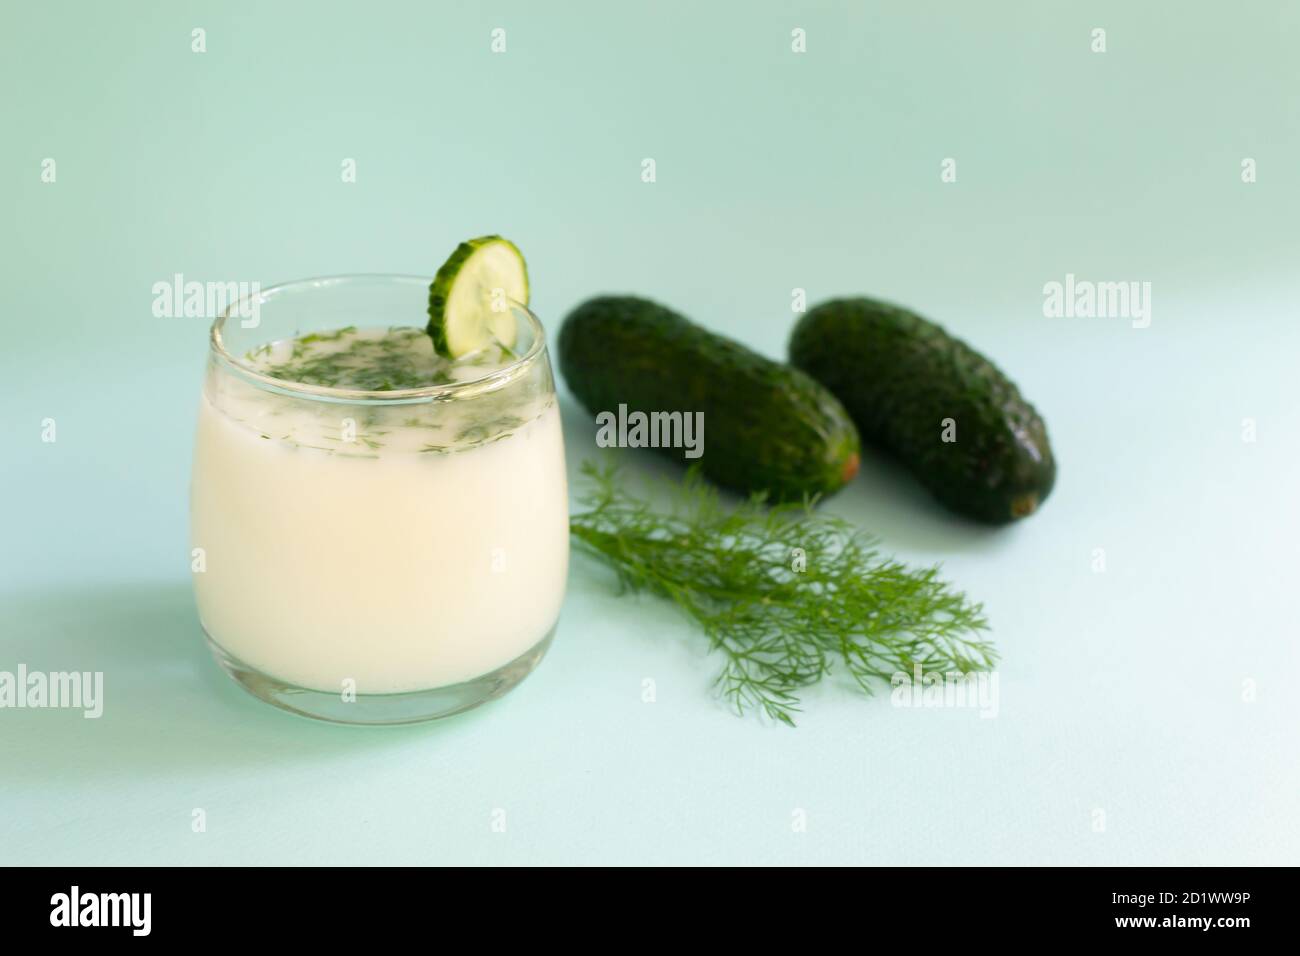 Ayran in a glass glass with a sprig of dill and cucumbers on a blue background. Fermented product concept. Copy space. Selective focus. Stock Photo